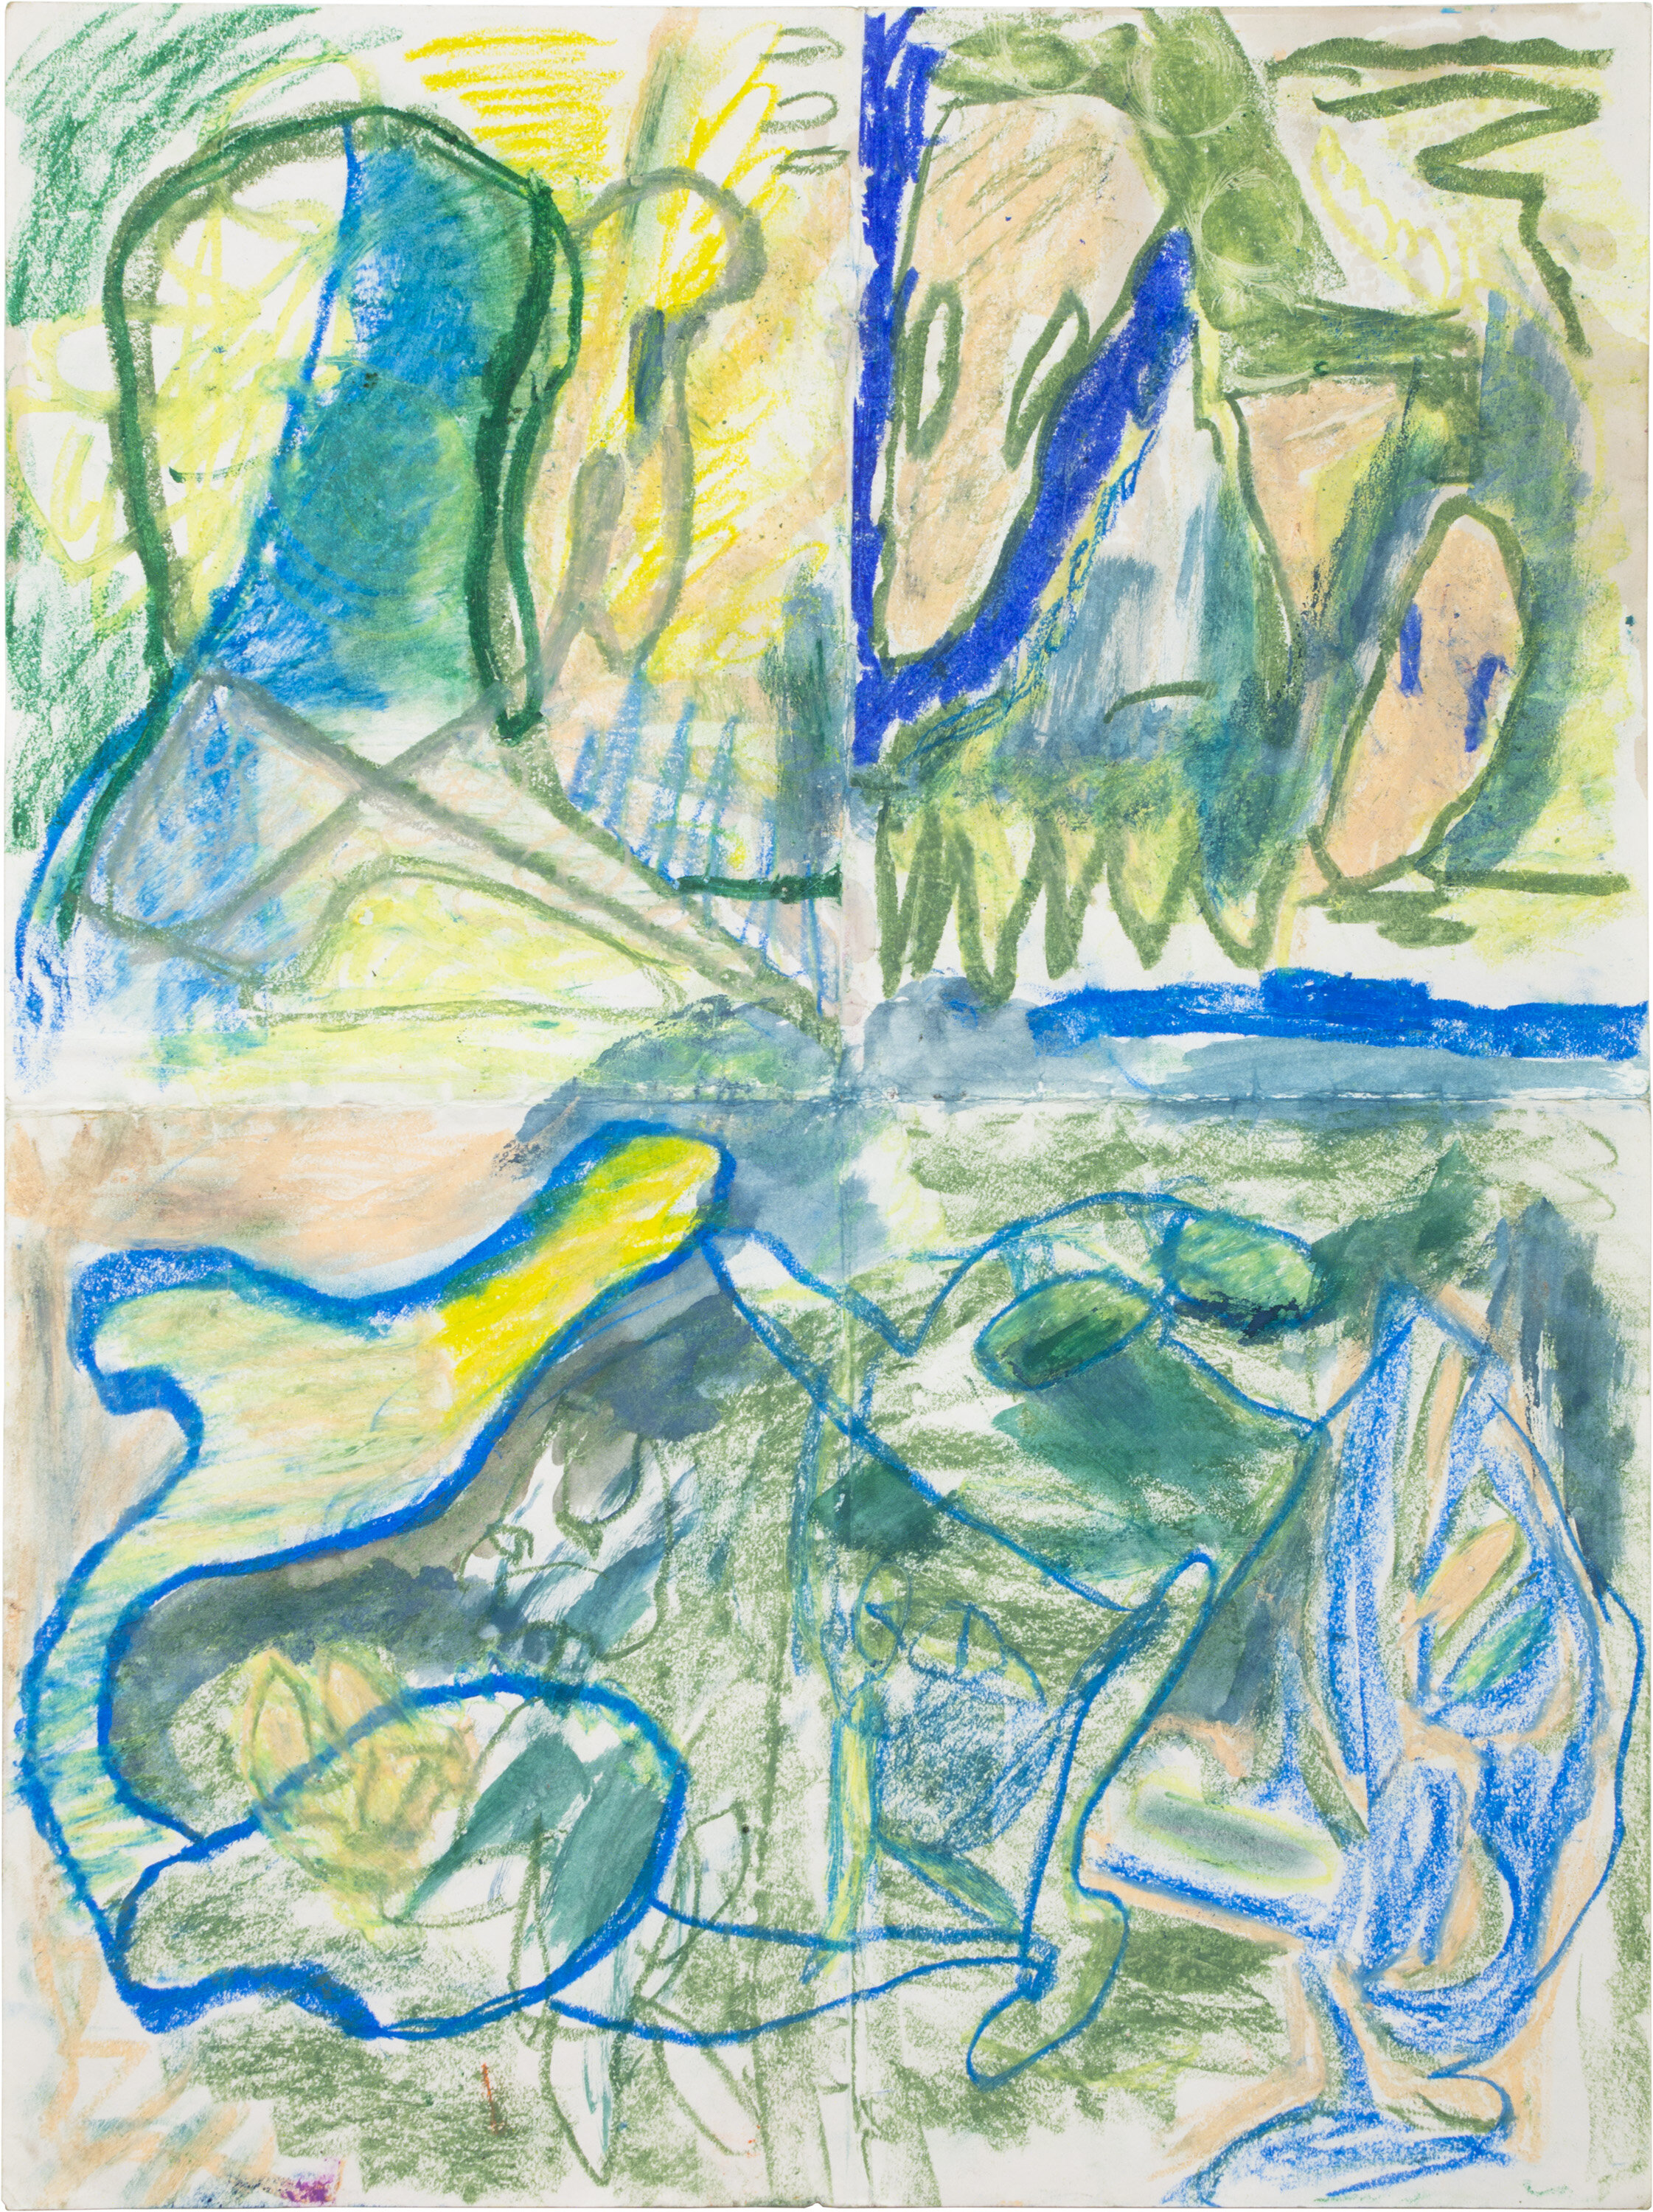  Drew Beattie and Ben Shepard   DBBS-DRW-2019-196   2019  acrylic and crayon on paper 24 x 18 inches 